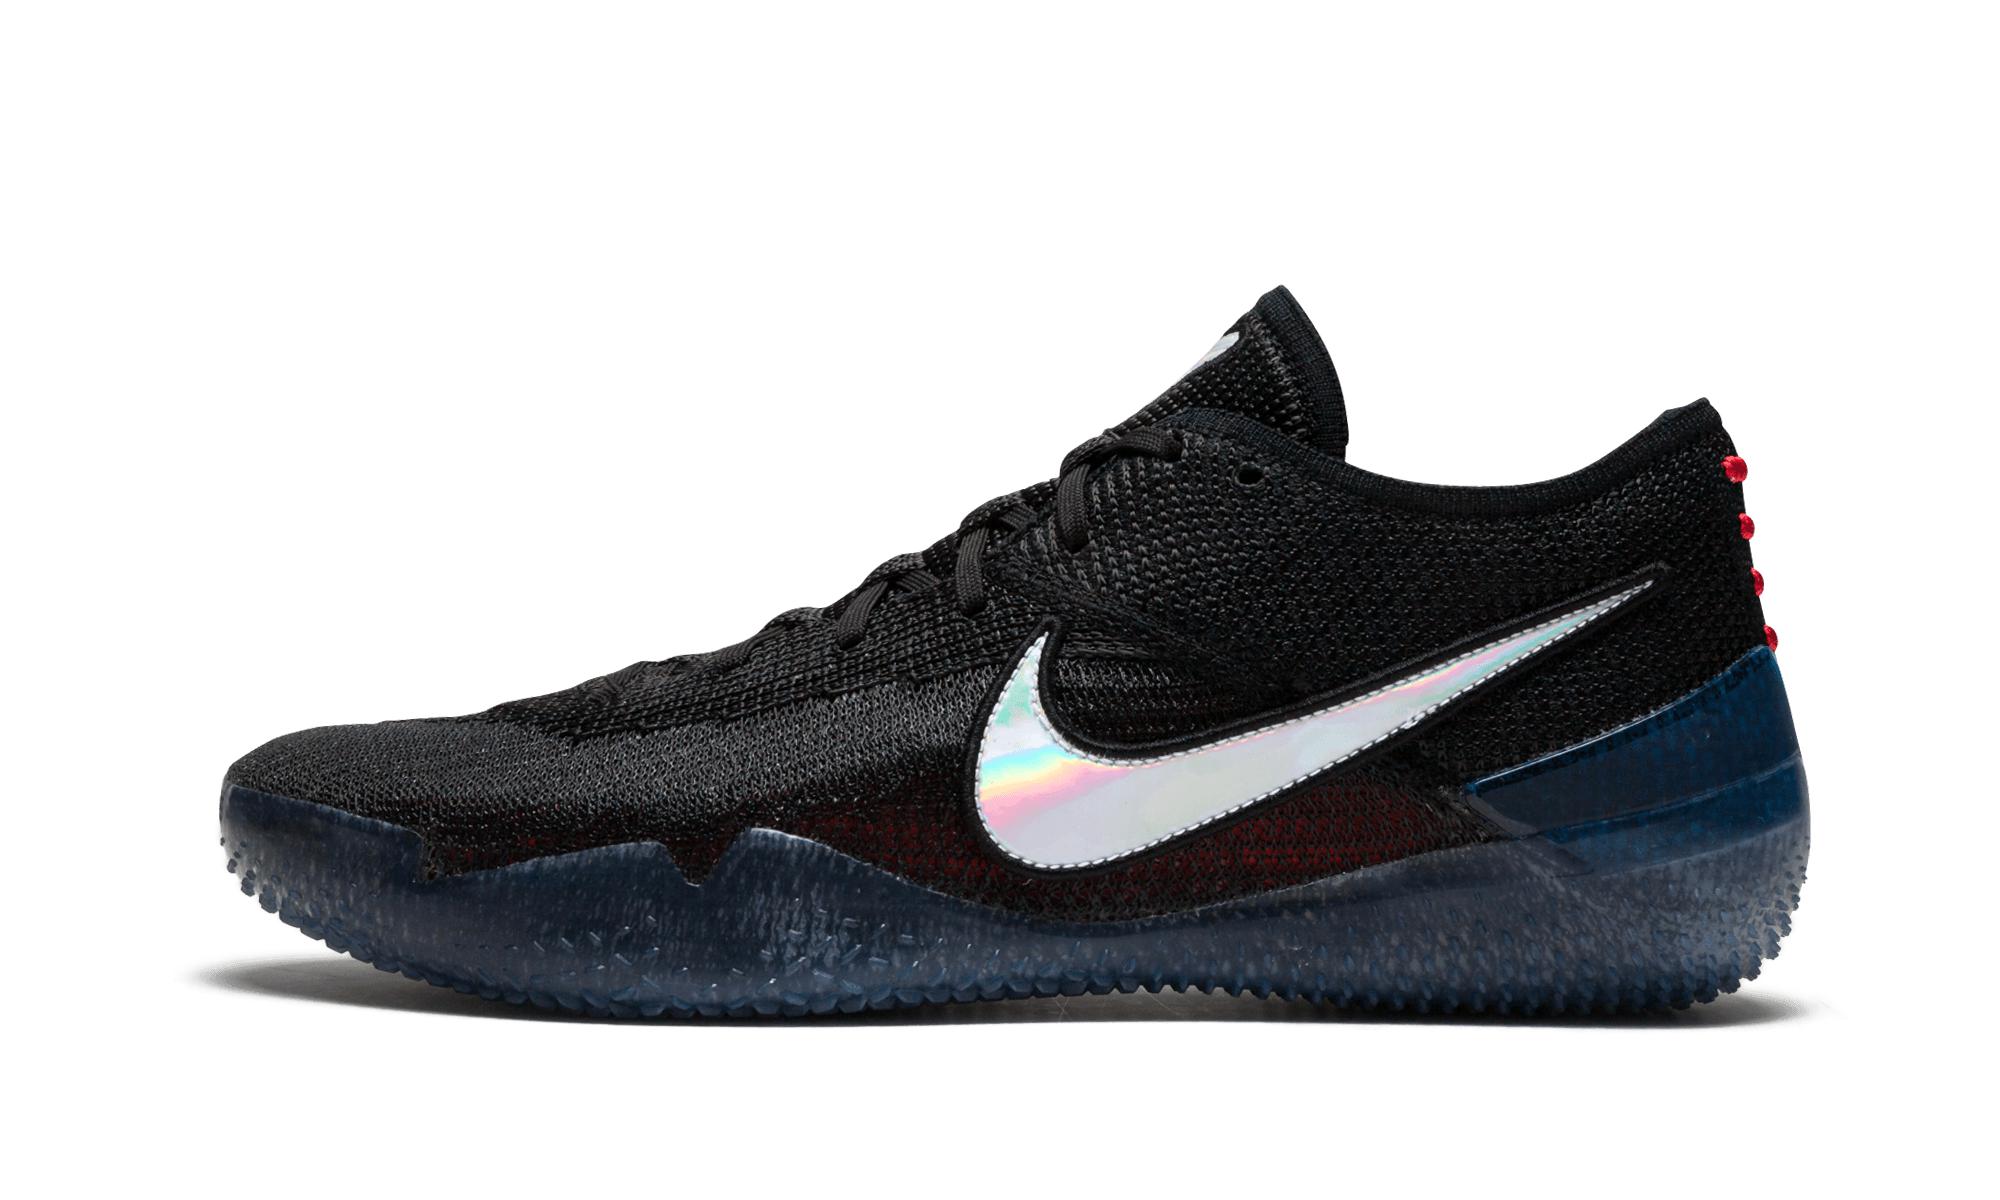 Lyst - Nike Kobe Ad Nxt 360 in Black for Men - Save 8.0%